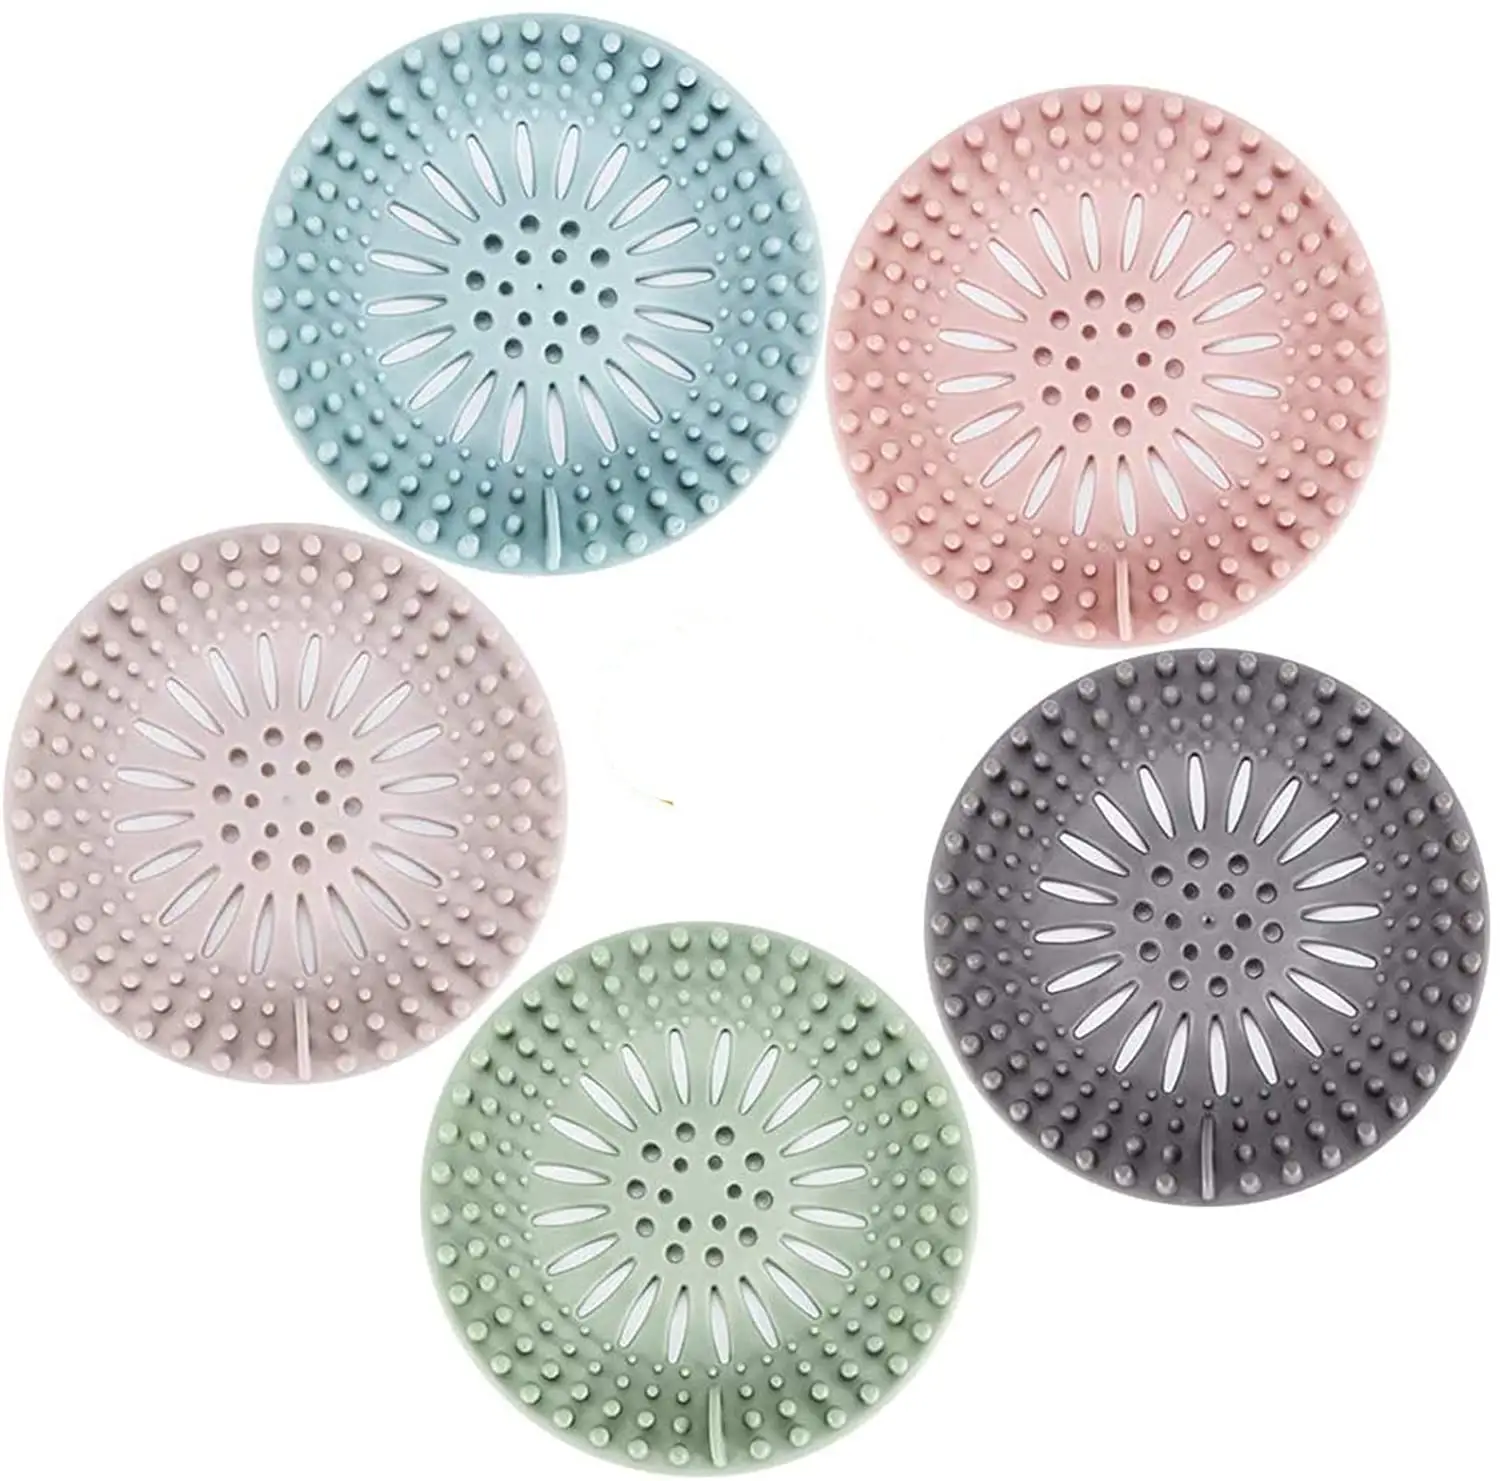 Best selling Shower Bathroom Bathtub and Kitchen Hair Catcher Drain Covers hair catcher durable silicone hair stopper